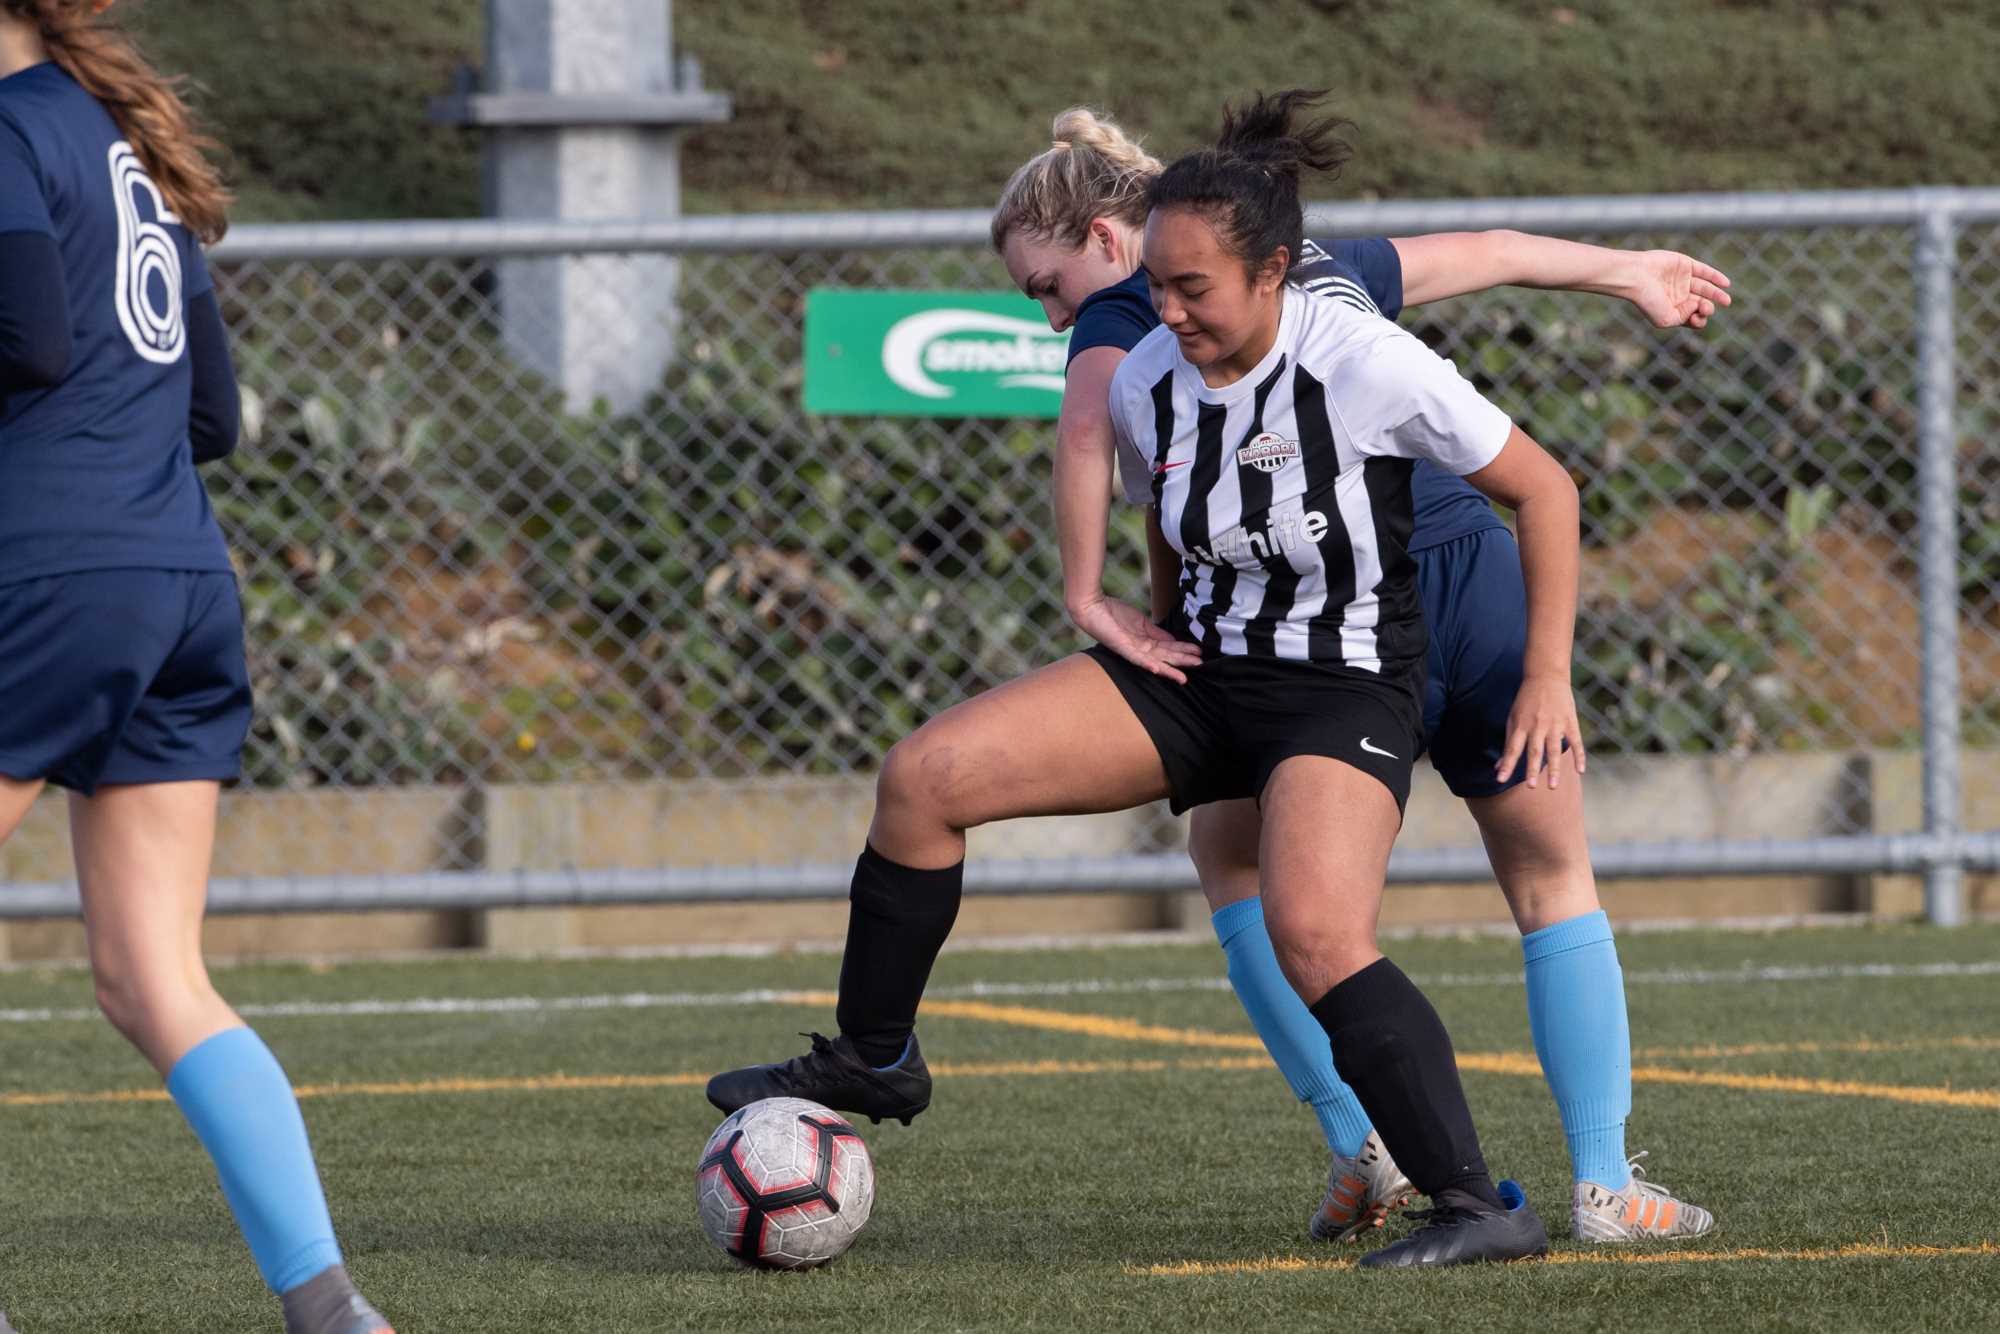 Capital Football | PNM, Wellington United play out thrilling W-League draw